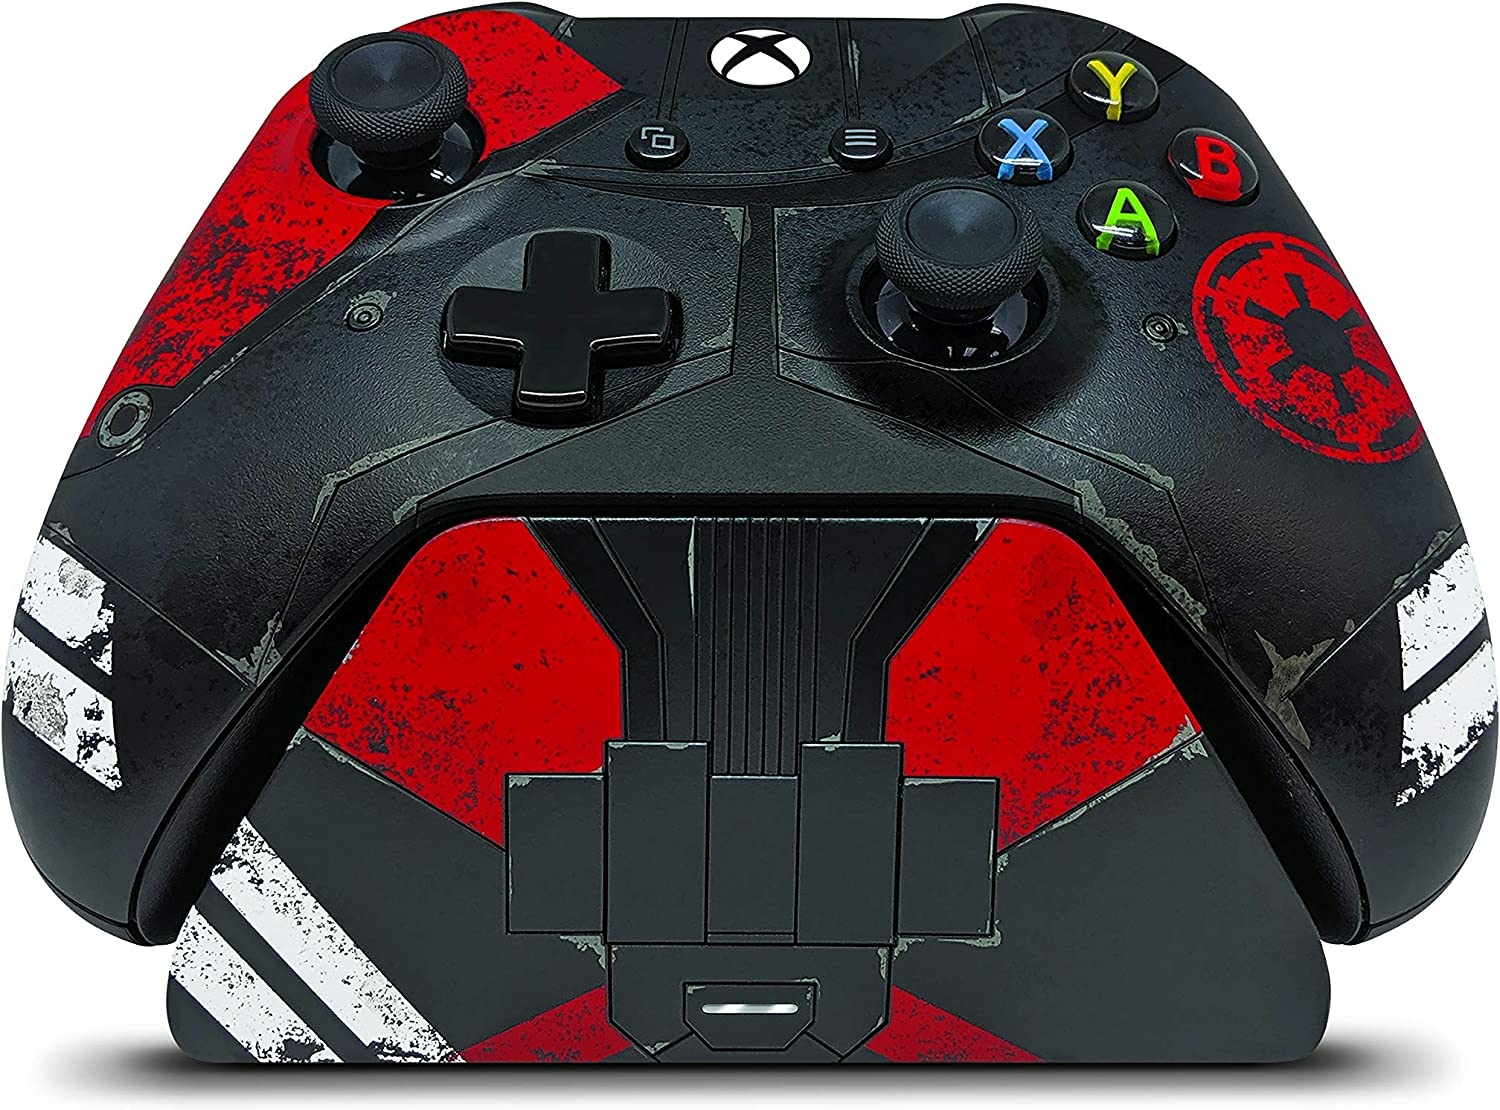 https://www.reference-gaming.com/assets/media/product/190325/manette-xbox-series-x-s-collector-star-wars-purge-trooper-razer-controller-gear-64172a5ba72d5.jpg?format=product-cover-large&k=1679239776